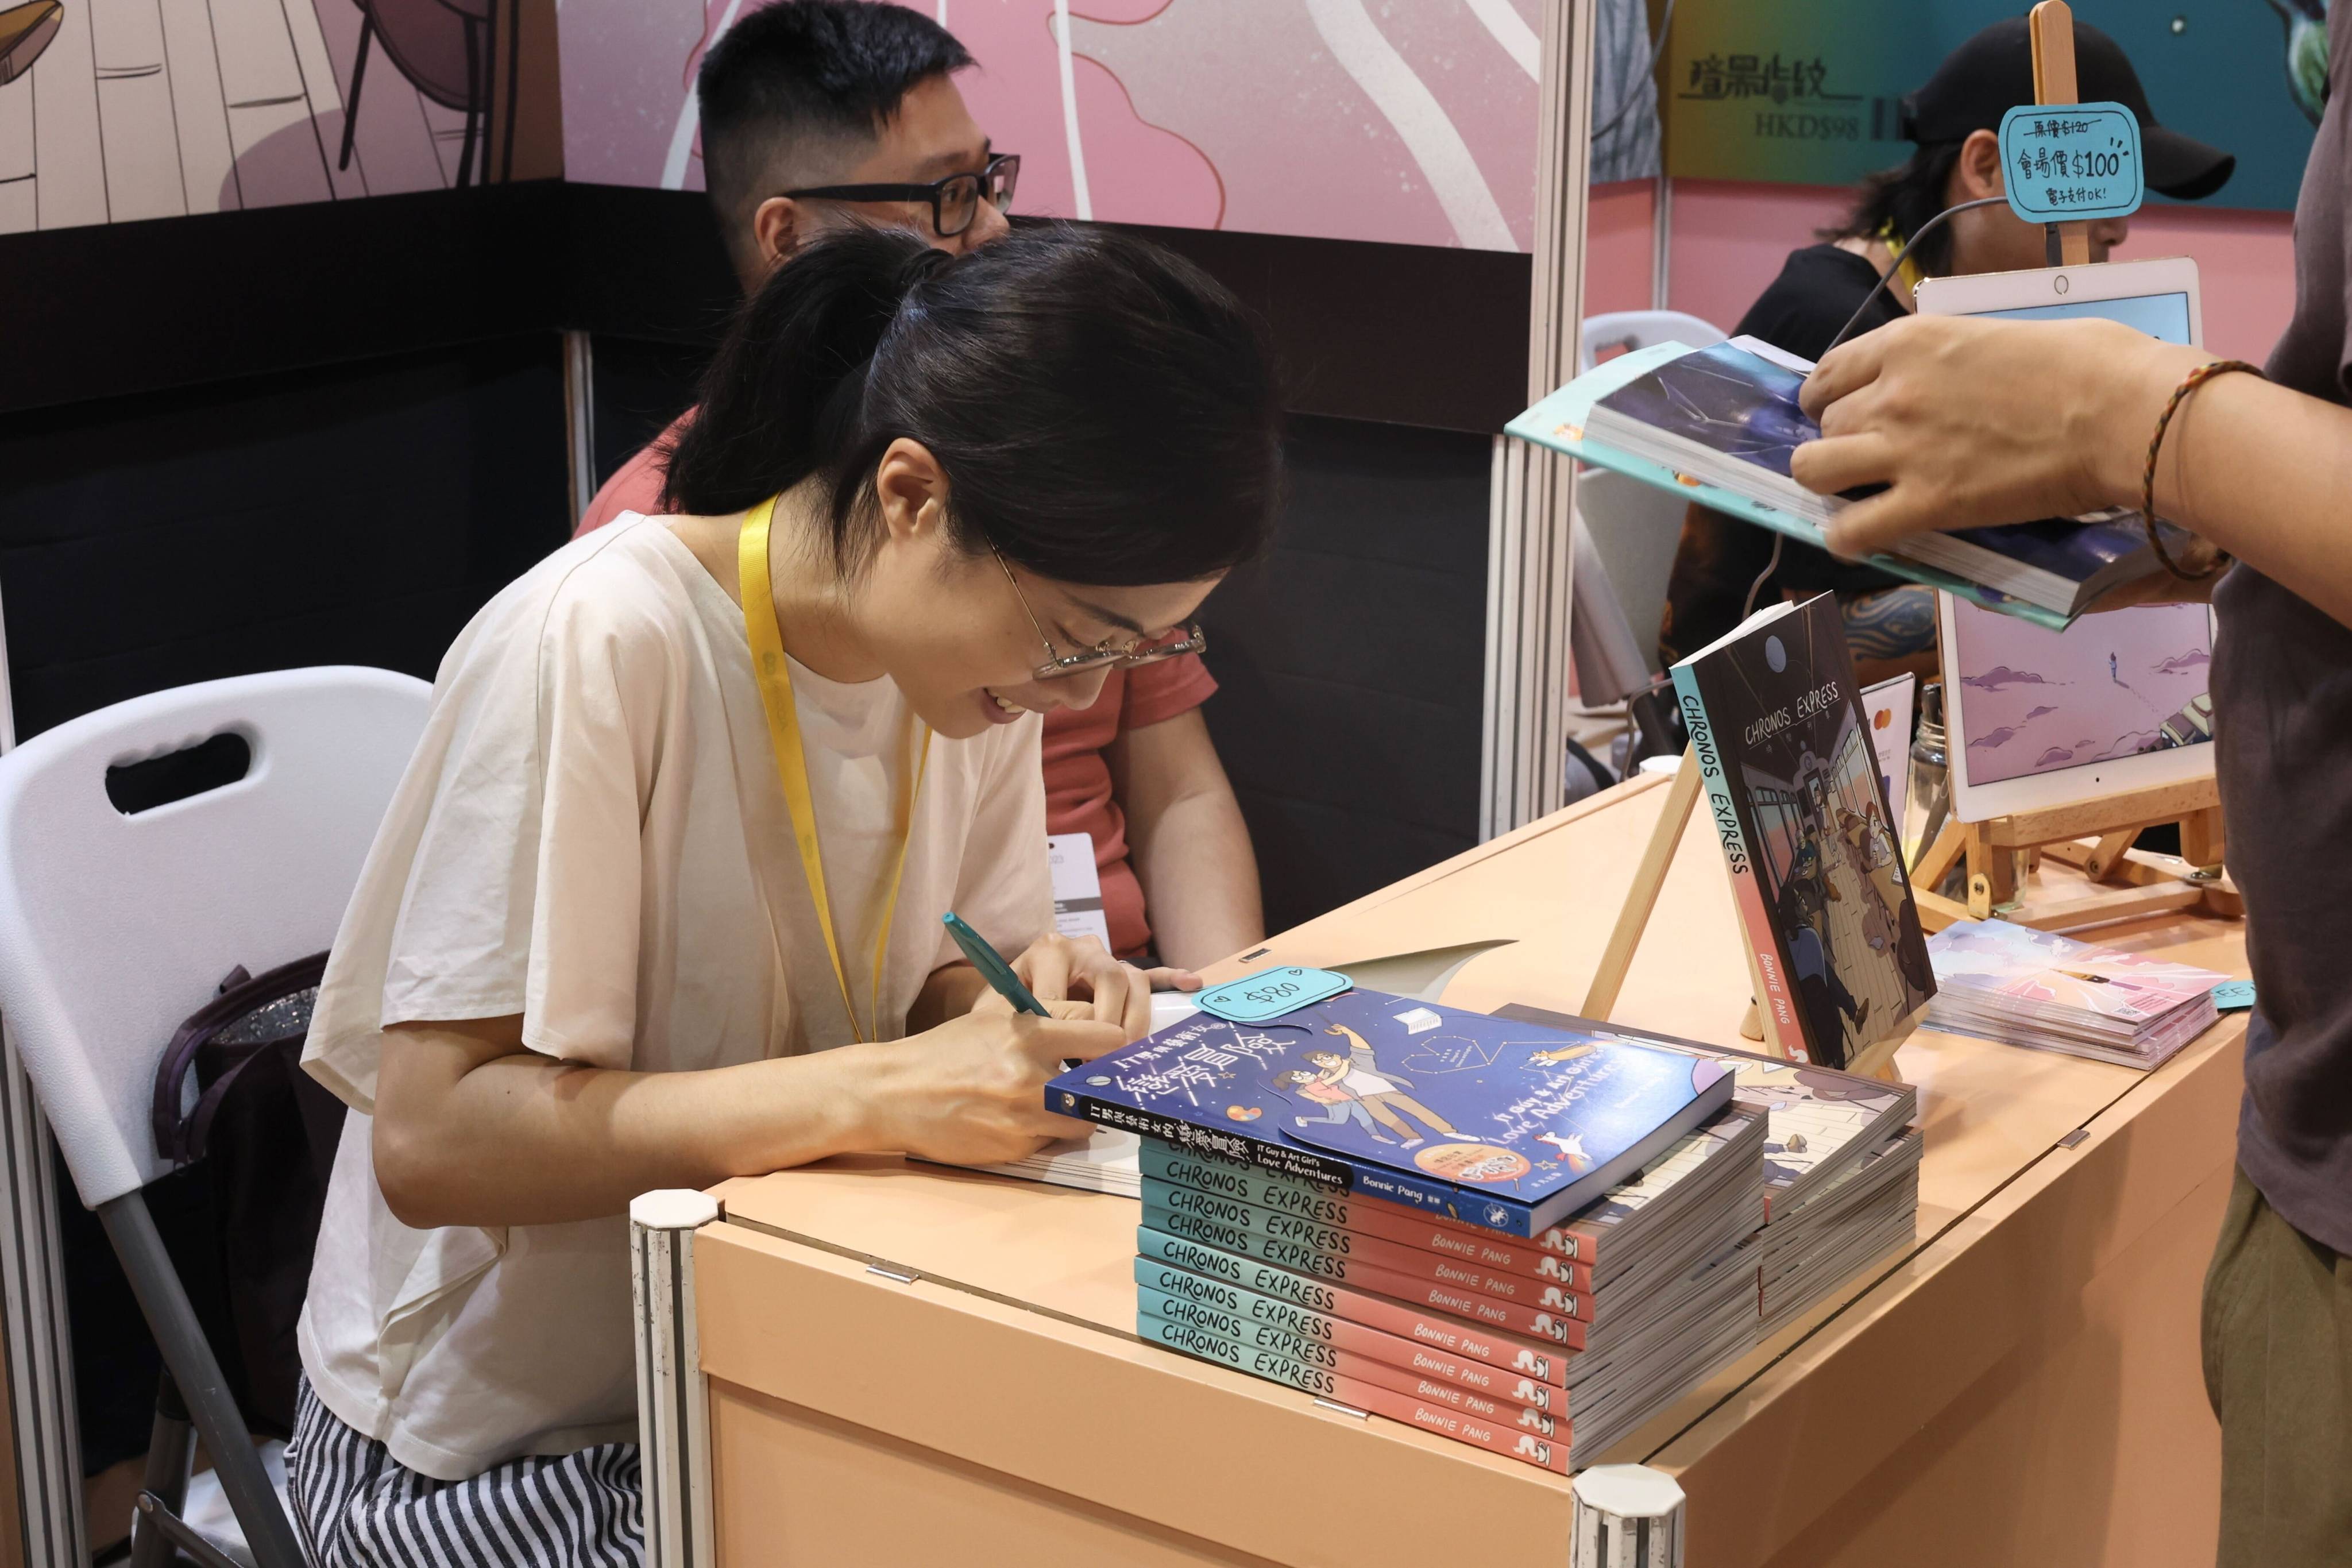 Bonnie Pang signs a copy of her new book for a fan at Ani-com & Games Hong Kong. Photo: Andee Capellan